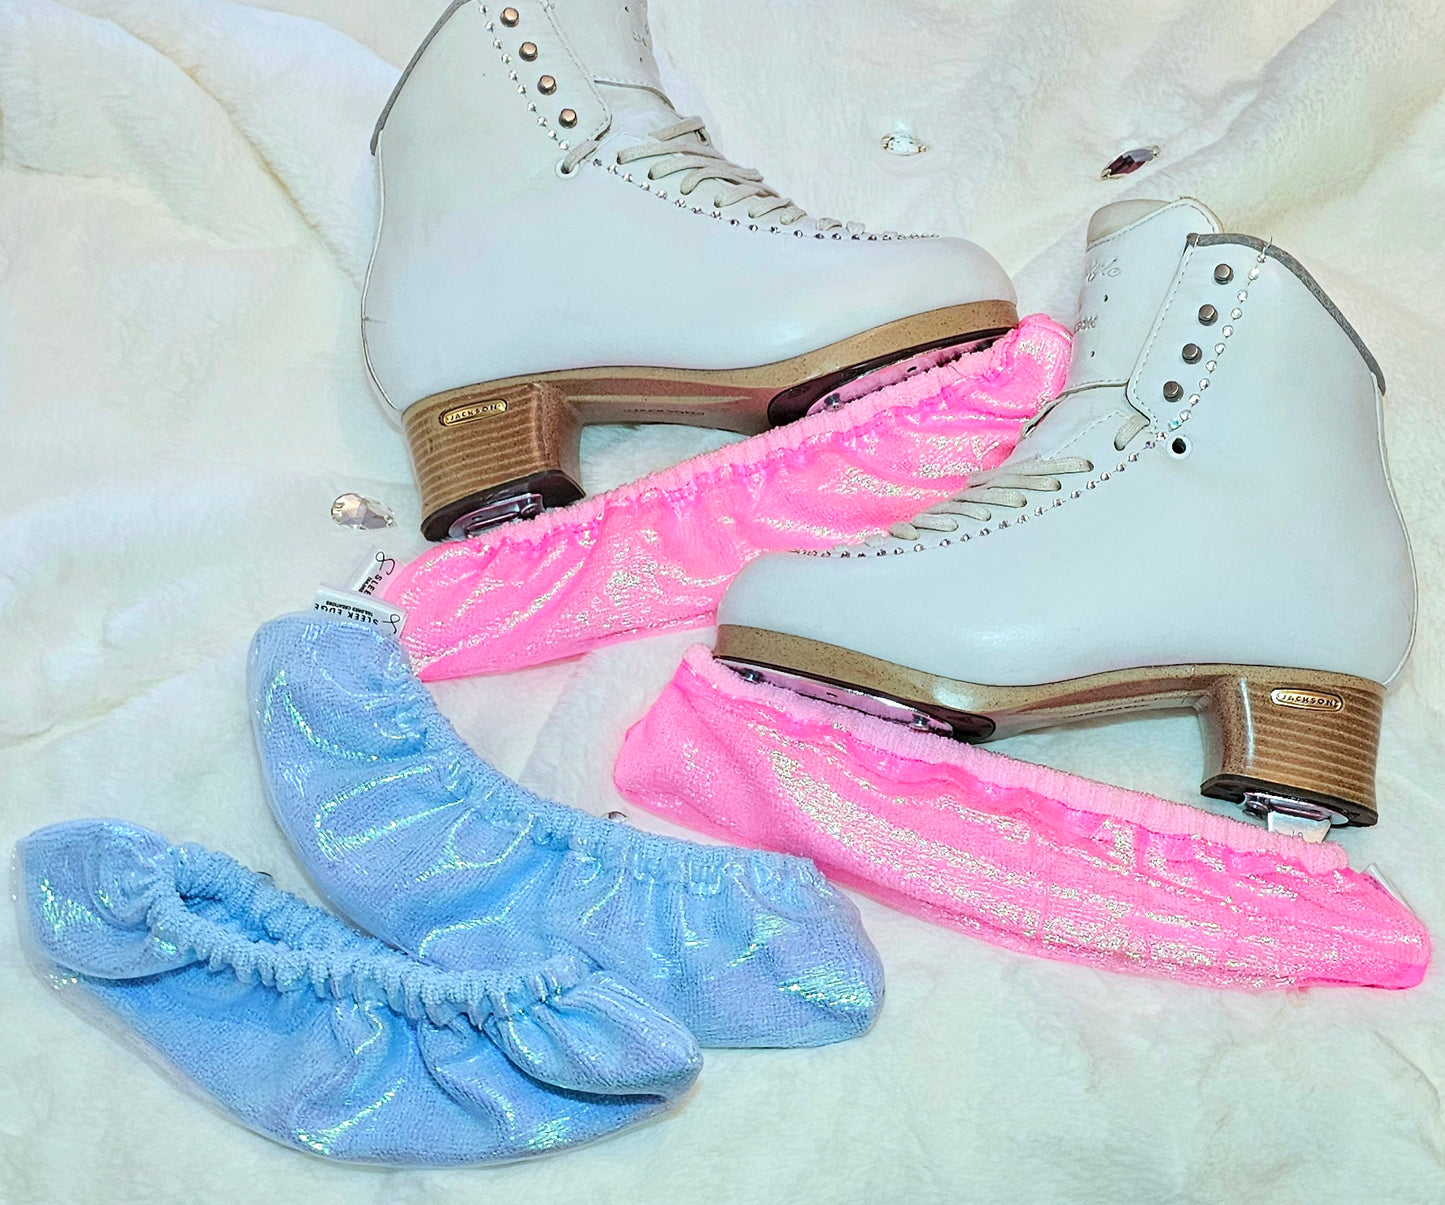 Glacial Glimmer Ice Skate Soakers